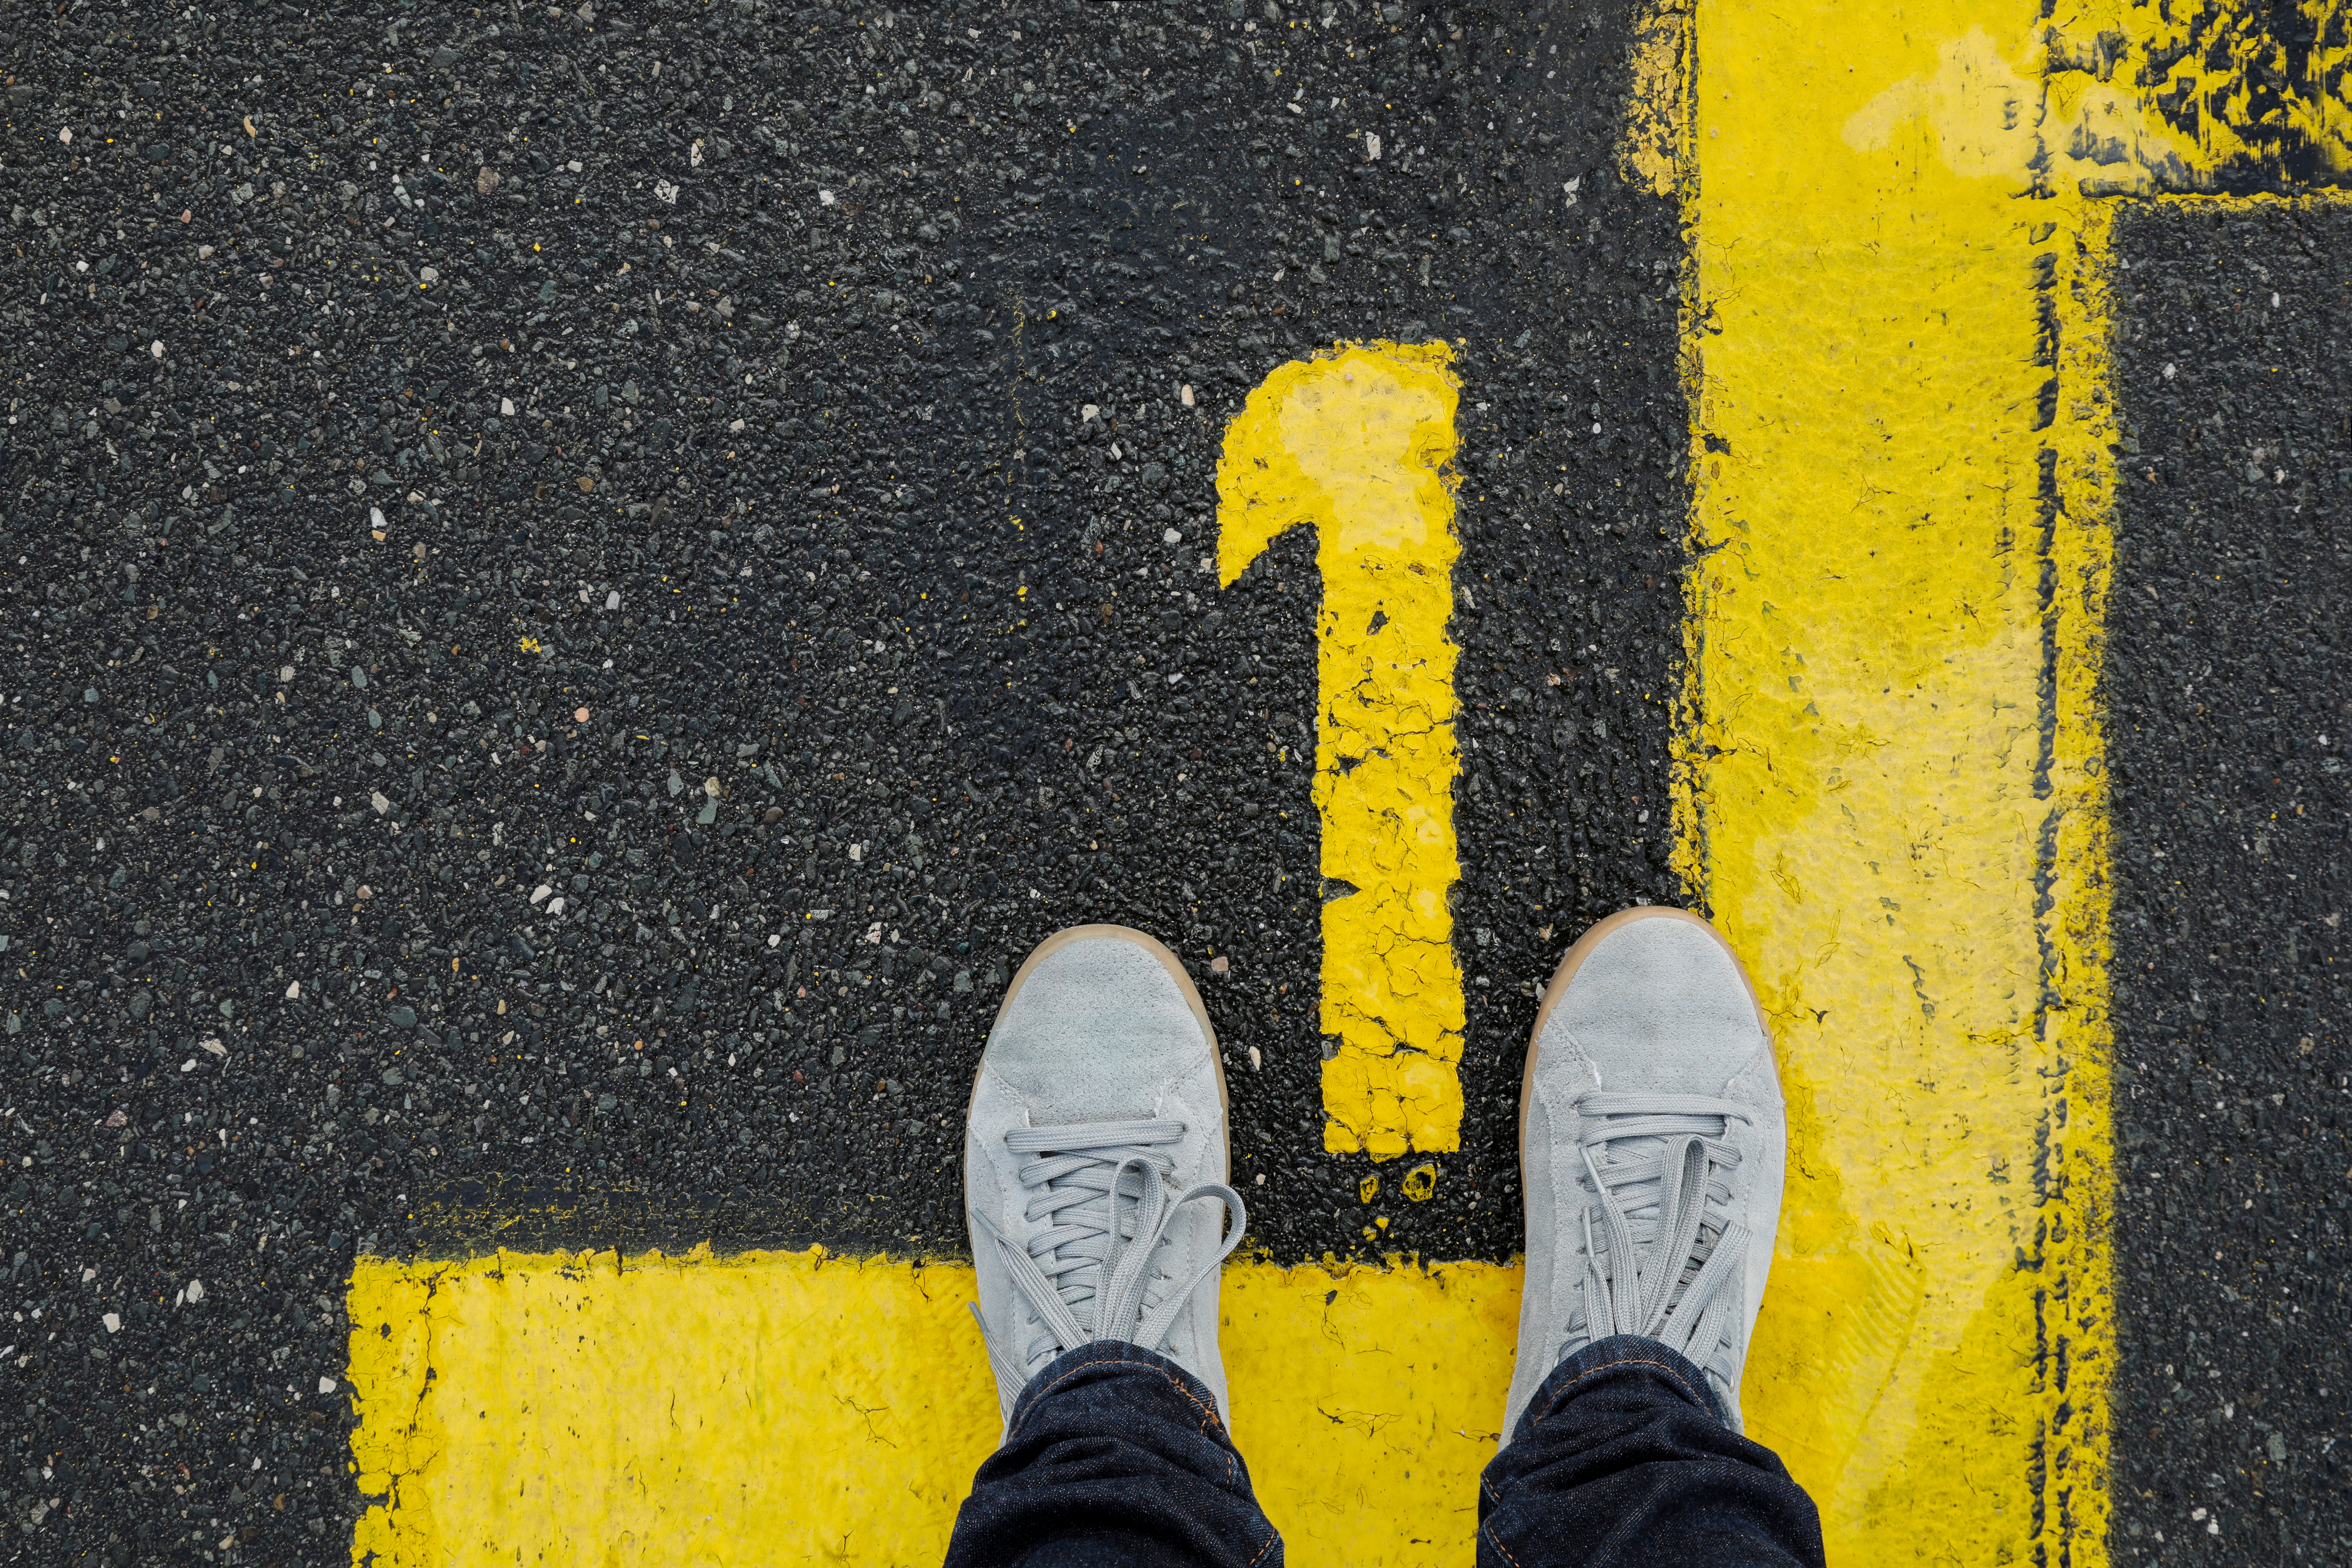 Image shows a yellow number 1 painted on an asphalt road, with a person's feet in sneakers pointed toward it.